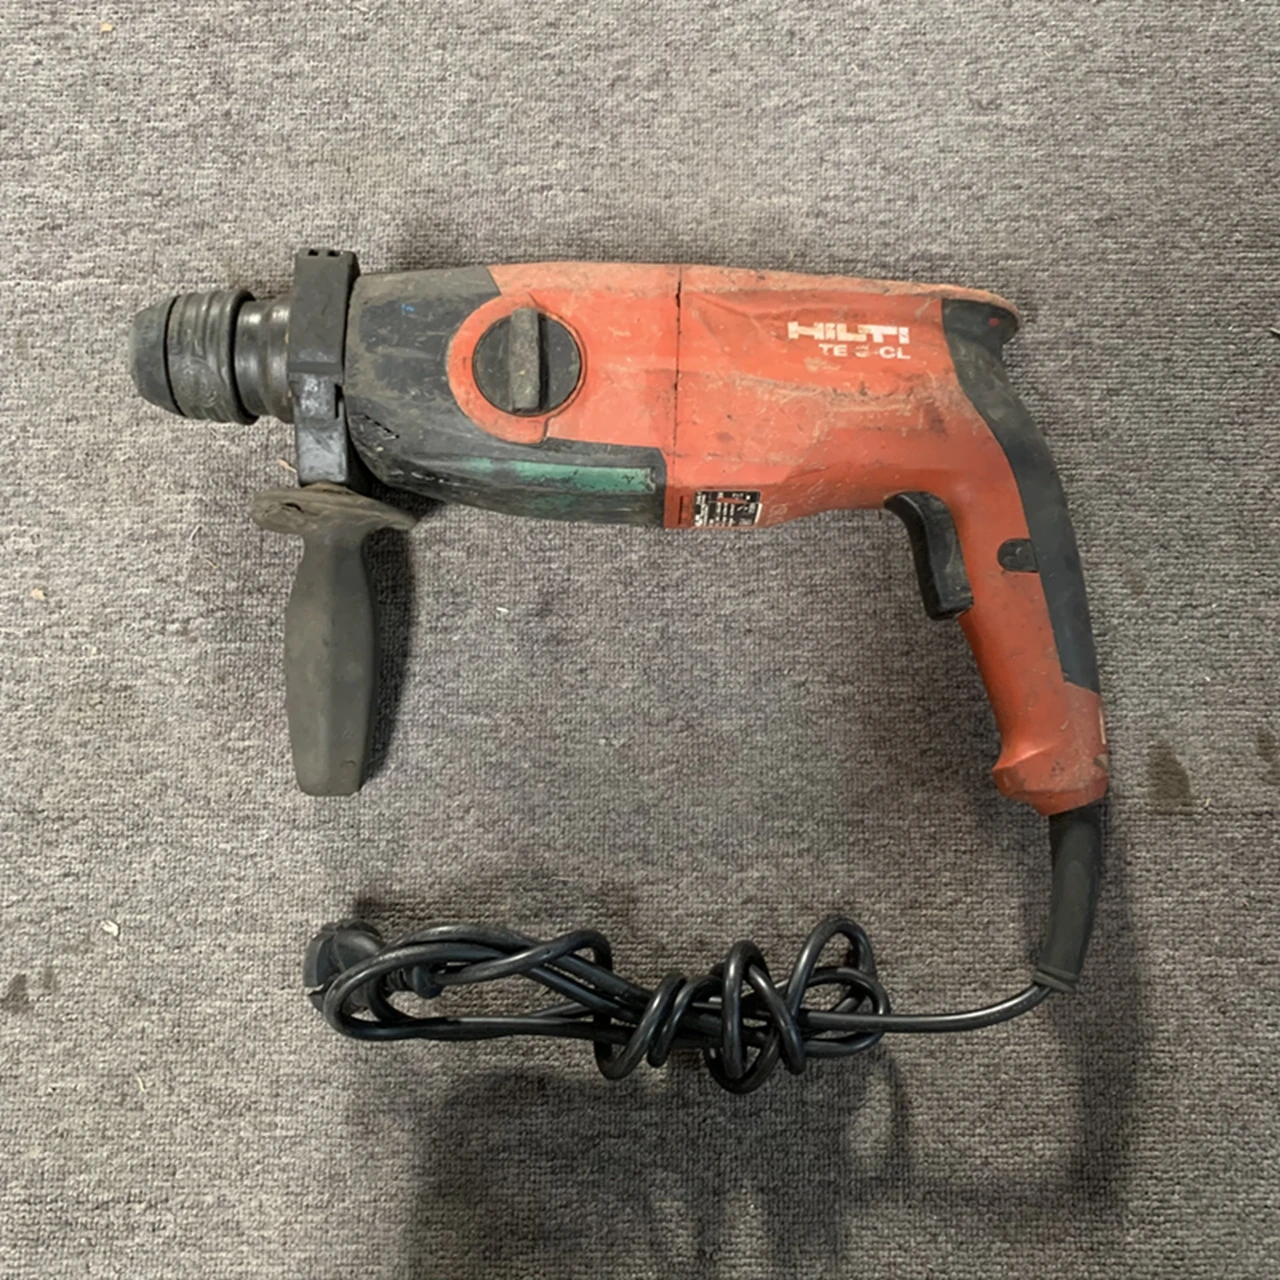 

Hilti TE 3-CL SDS-Plus Rotary Hammer Drill Corded 220V Body only, second-hand